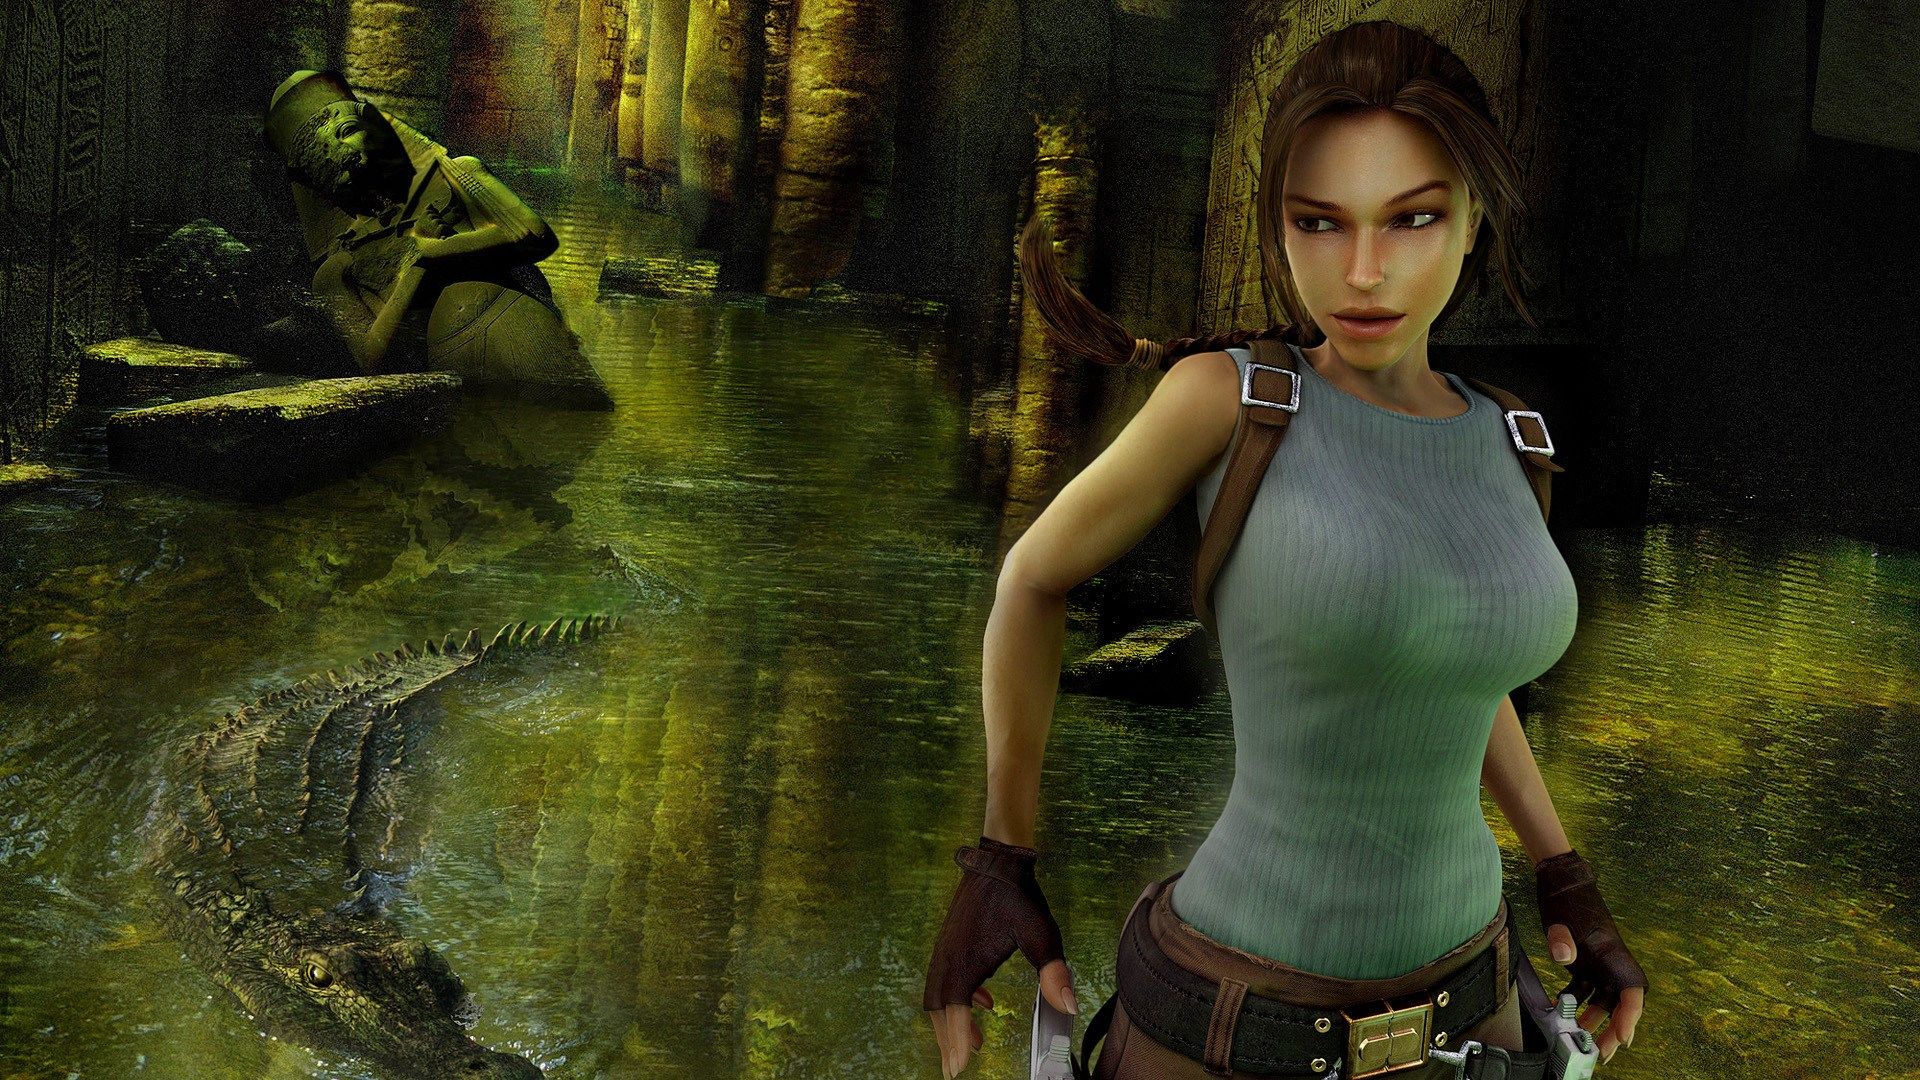 X px free screensaver wallpapers for tomb raider anniversary by brand robertson for ns tomb raider tomb raider game tomb raider artwork